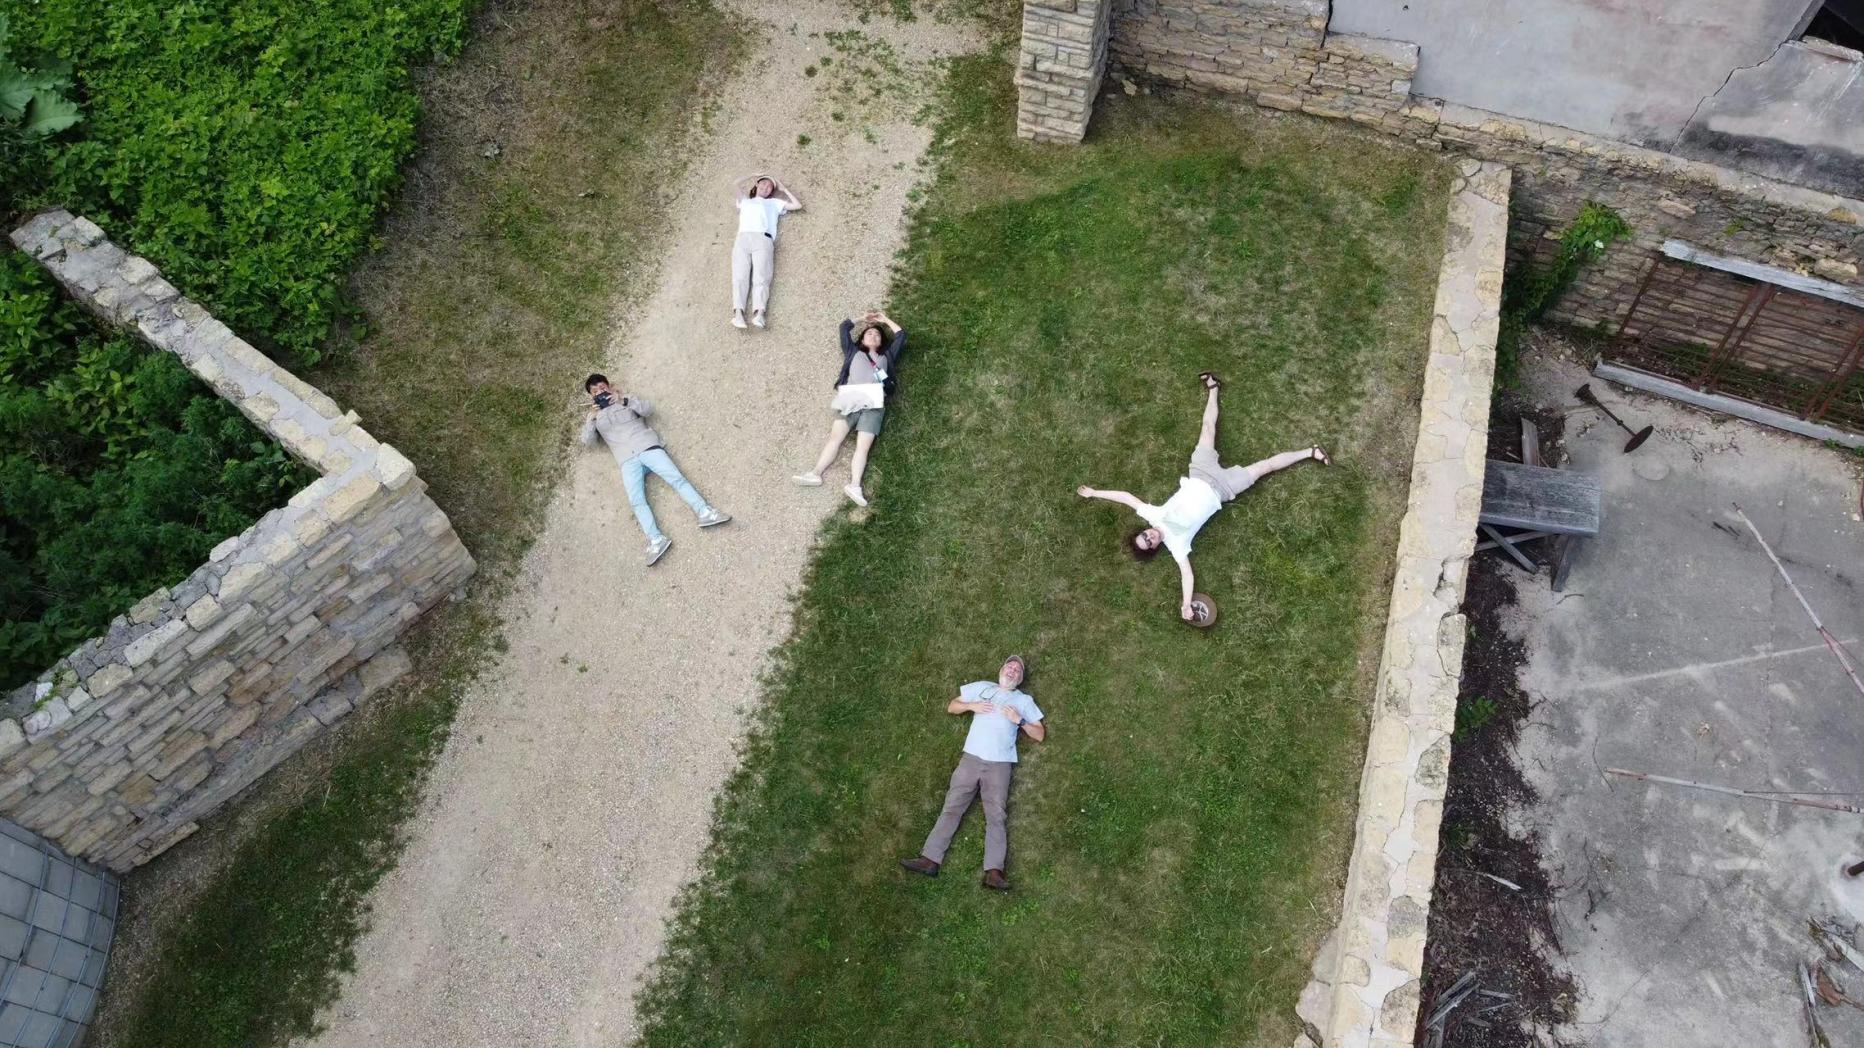 Students have fun practicing drone photography during their summer internship at Frank Lloyd Wright’s Taliesin Midway Barns in Wisconsin.